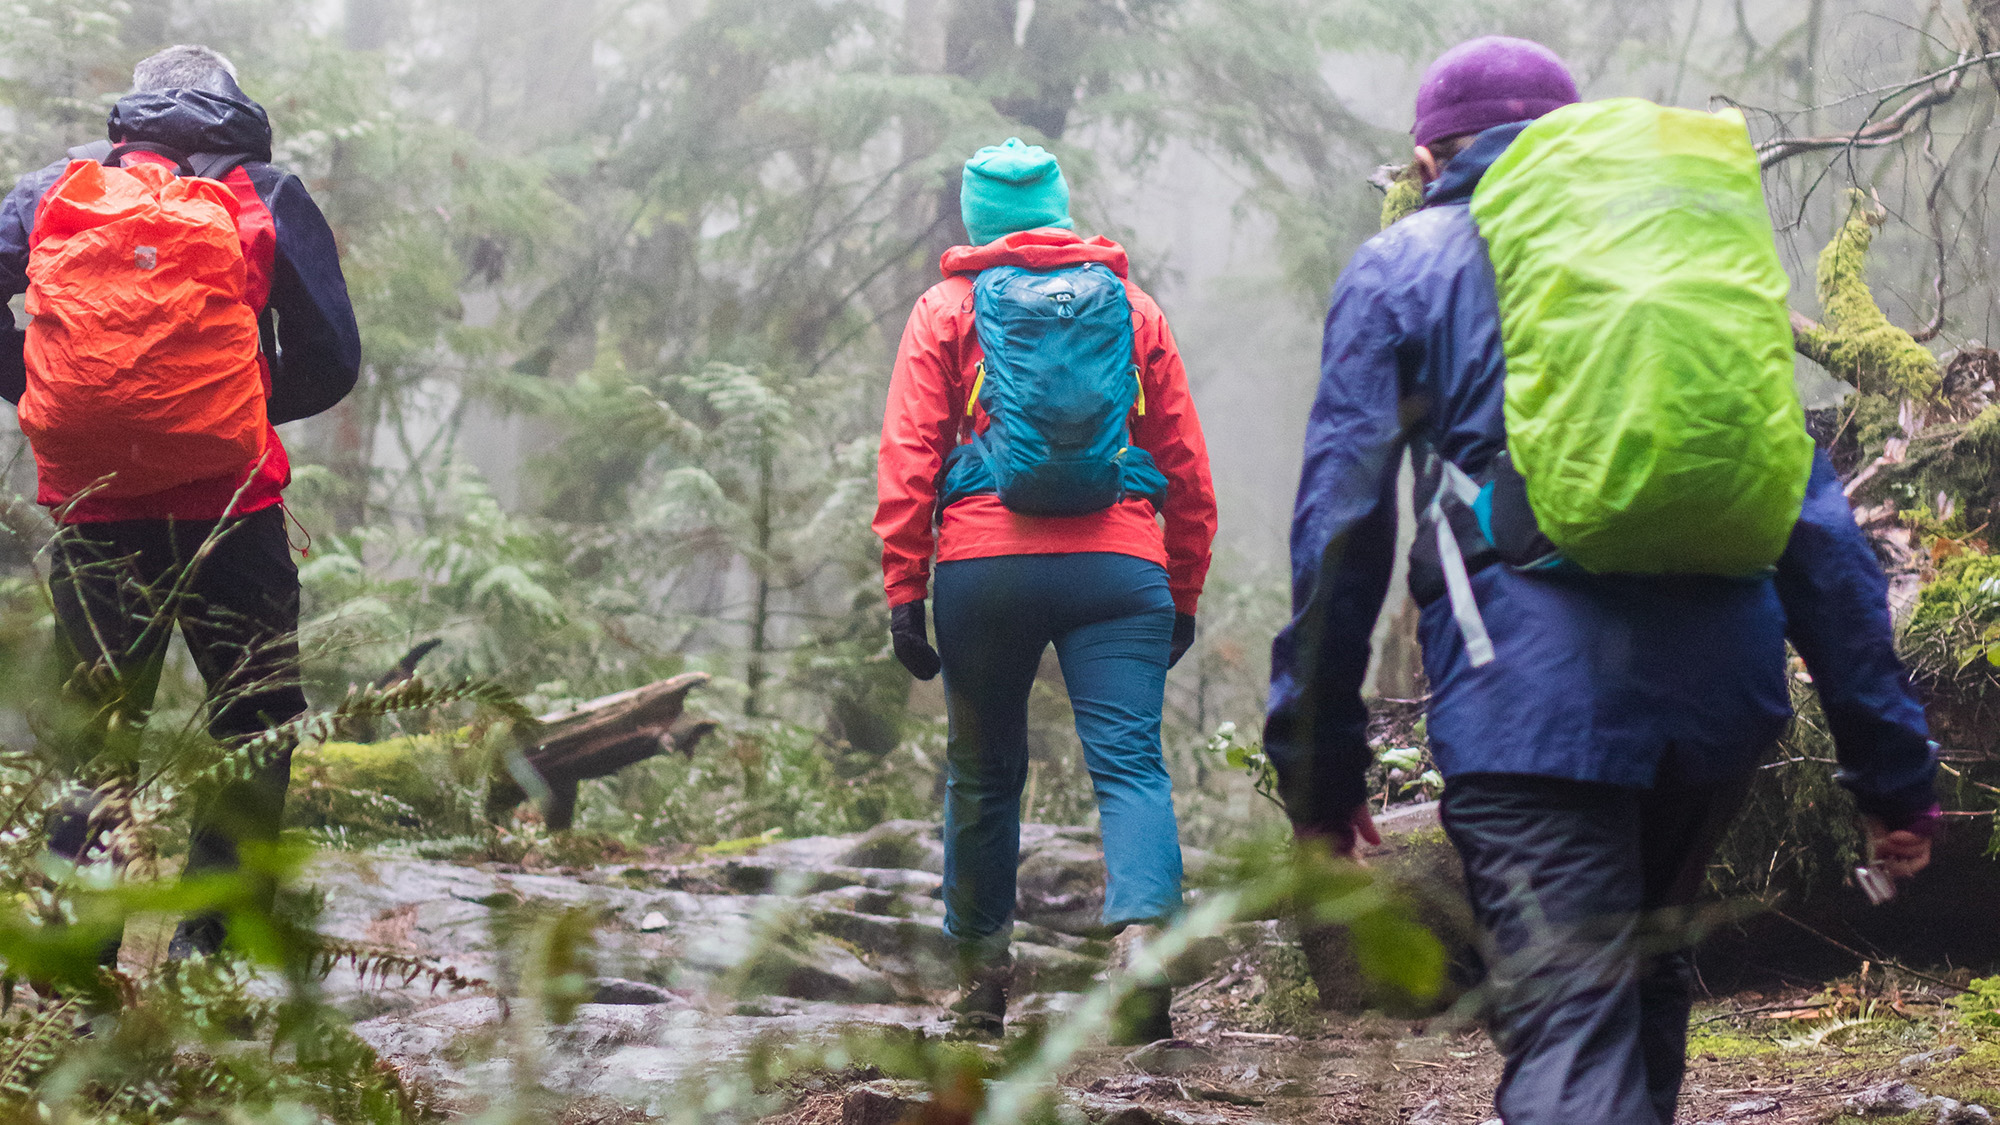 Ways to safe safe while hiking during severe weather season